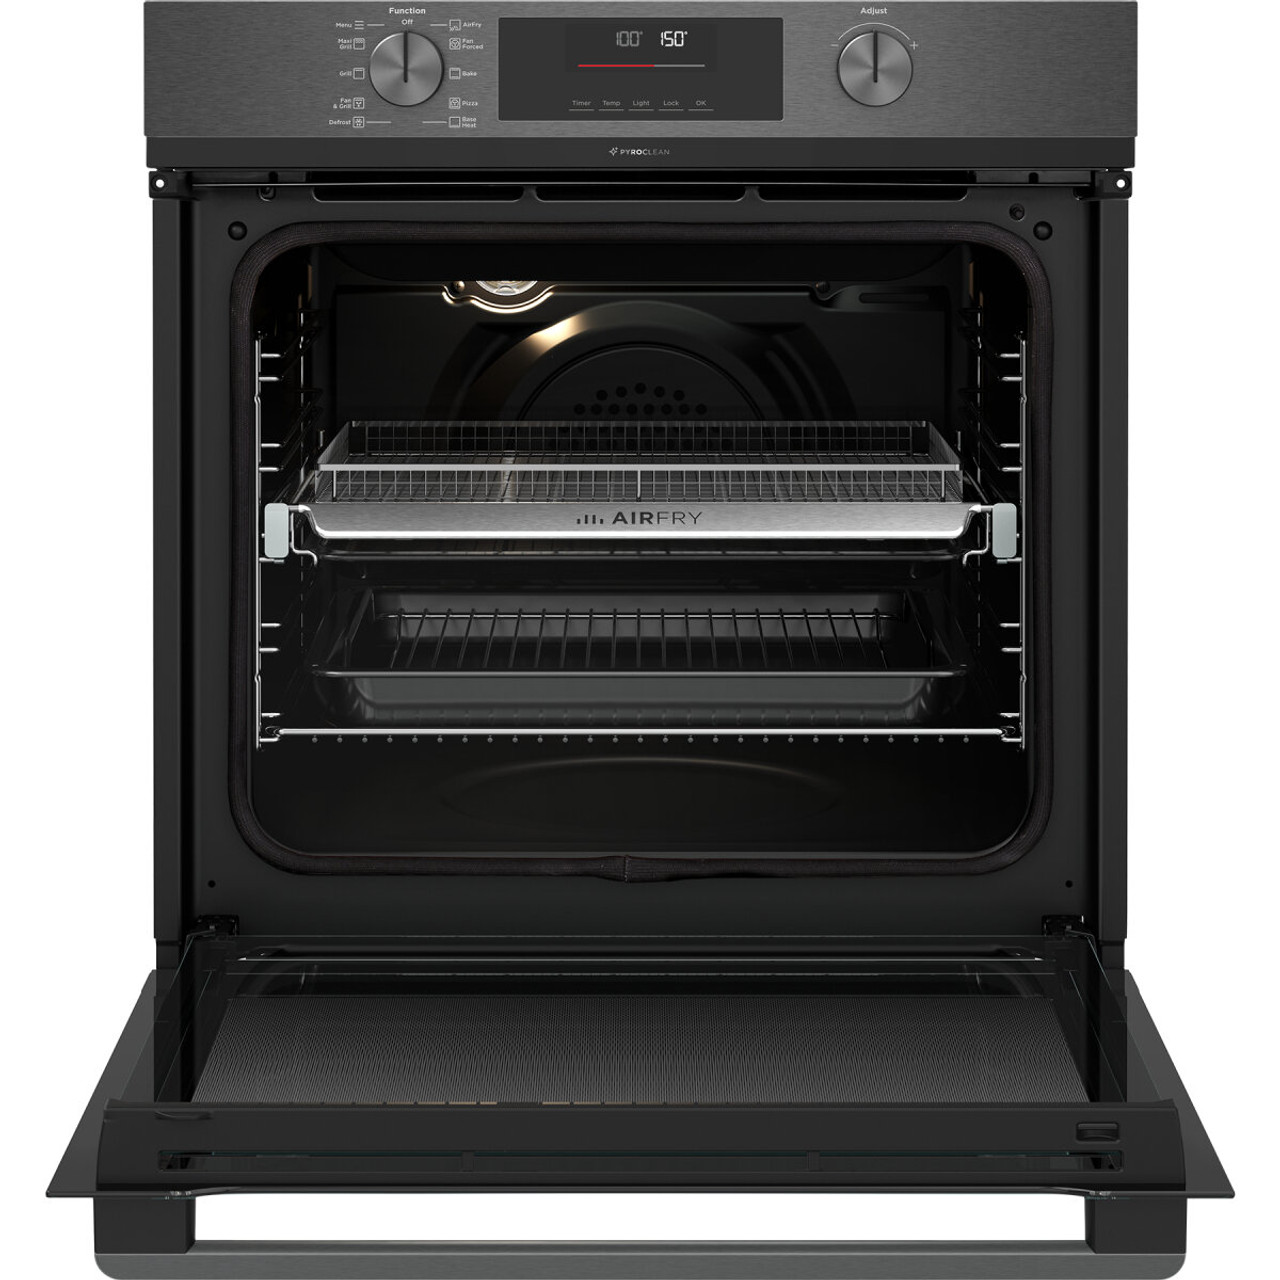 WVEP6716DD – 60cm Multi-Function Pyrolytic Oven with AirFry – Dark Stainless Steel